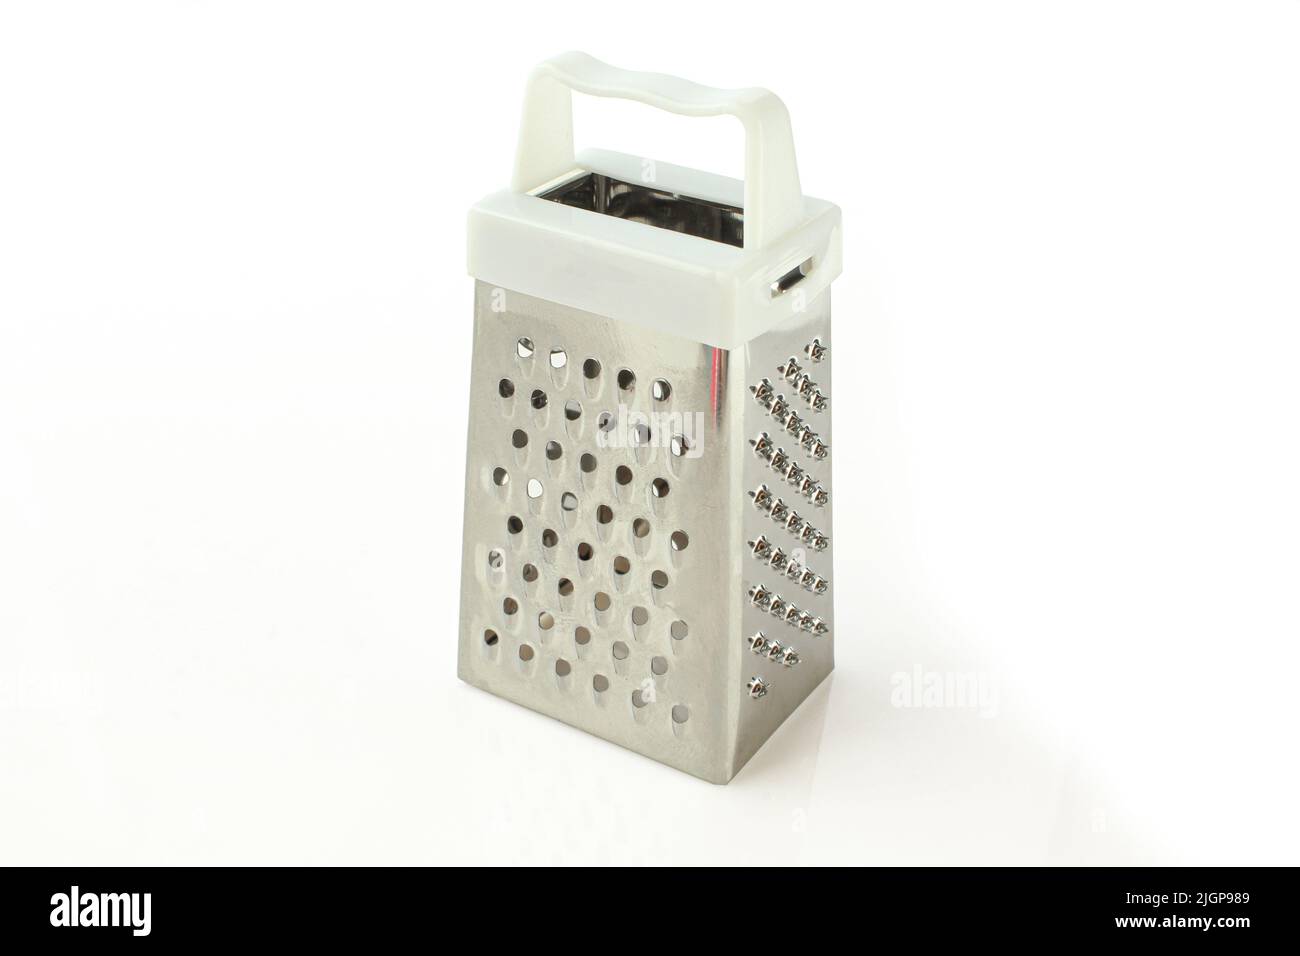 Grater in stainless steel isolated on white background /// cheese shredder  slicer cut out kitchen utensil tool kitchenware stainless object equipment  Stock Photo - Alamy